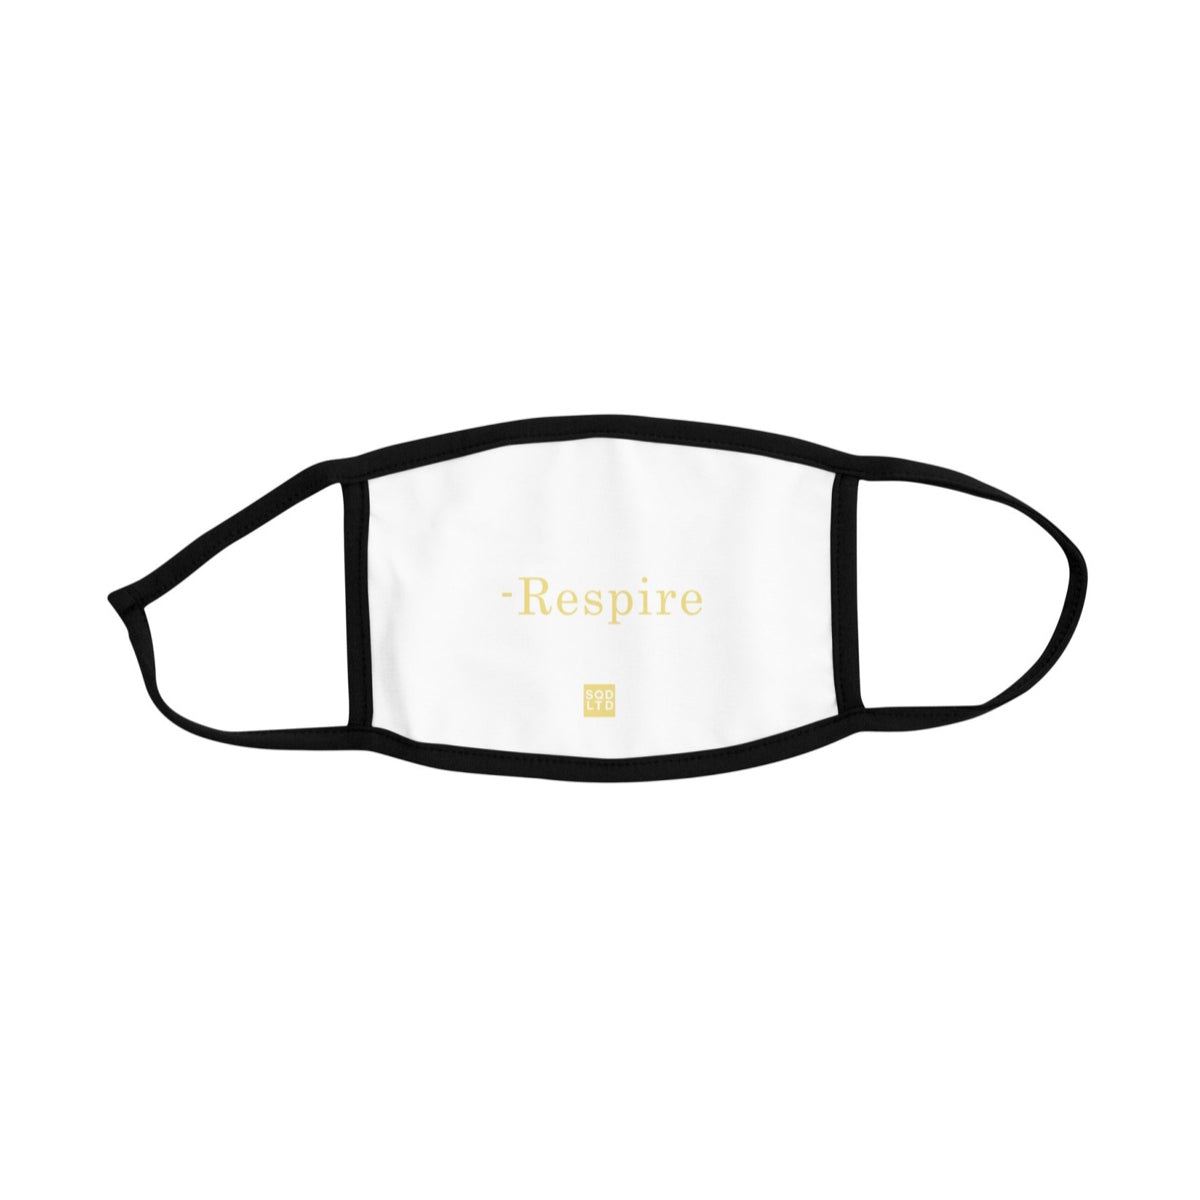 Respire Face Mask W by Squared Limited